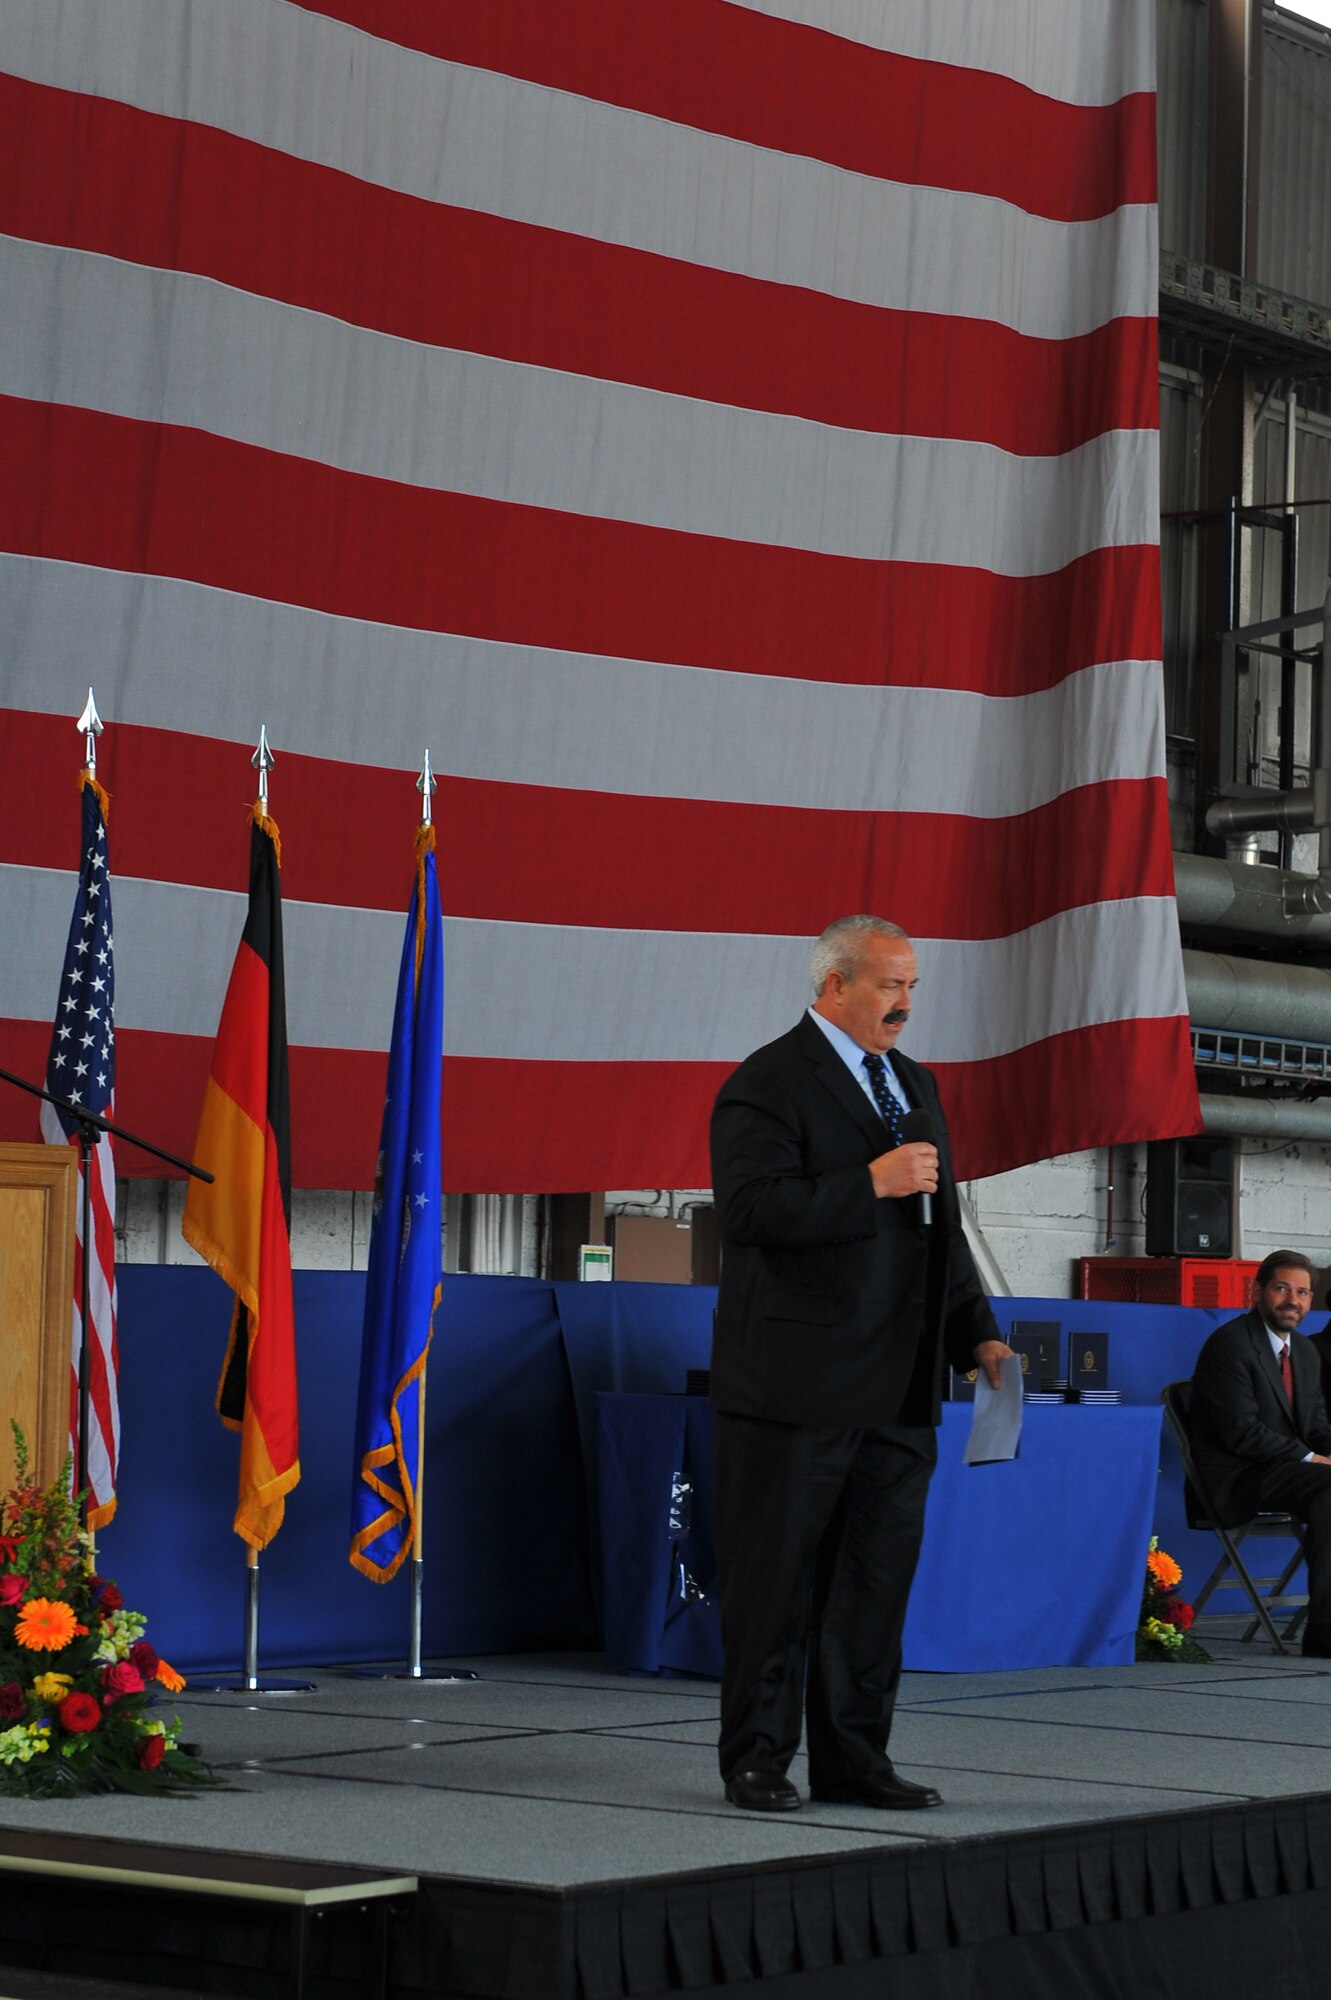 SPANGDAHLEM AIR BASE, Germany – Guest speaker, Michael Laue, BHS sports coordinator, speaks to Bitburg High School graduates about preparing and executing their goals and plans for their futures during their graduating ceremony inside Hangar 1 here June 9. The class of 2012 consisted of 54 students. More than 300 family members and guests attended the ceremony to celebrate the completion of their high school education. (U.S. Air Force photo by Airman 1st Class Dillon Davis/Released)